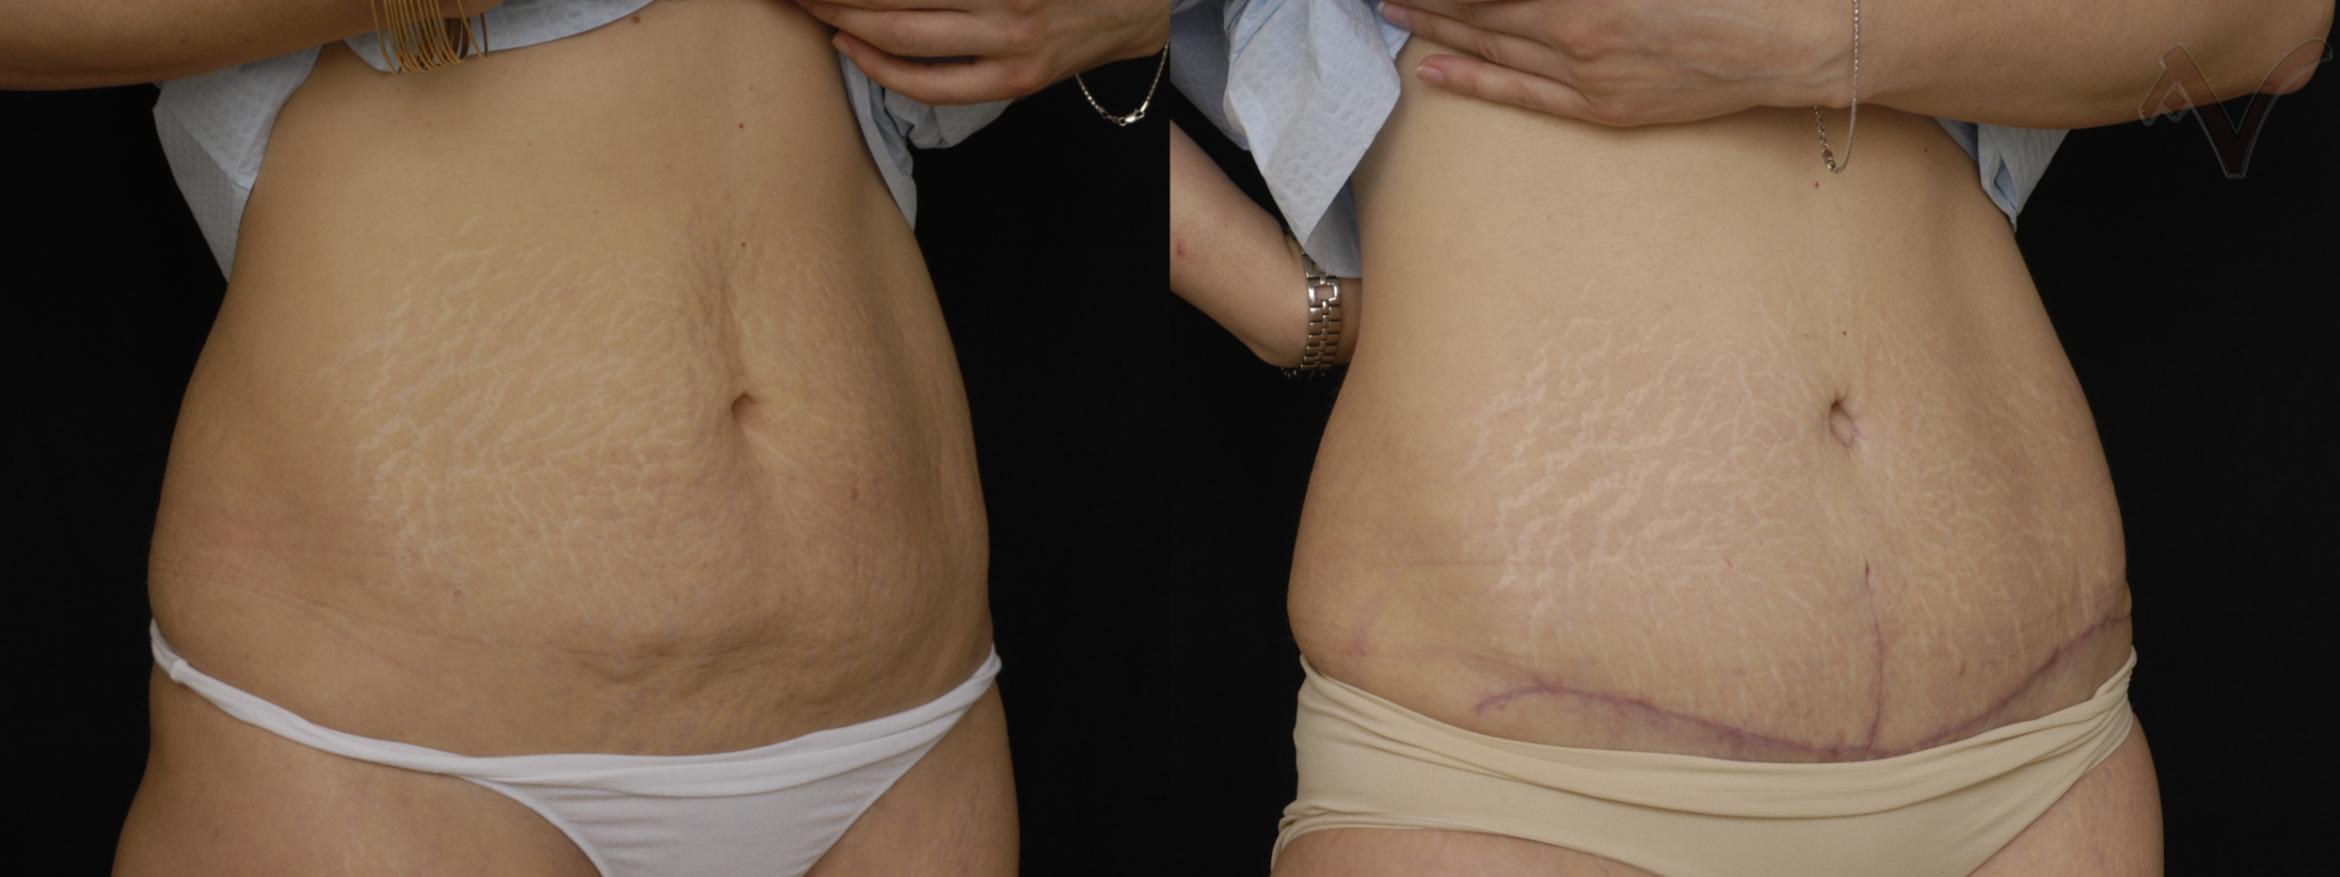 Before & After Tummy Tuck Case 250 Right Oblique View in Los Angeles, CA